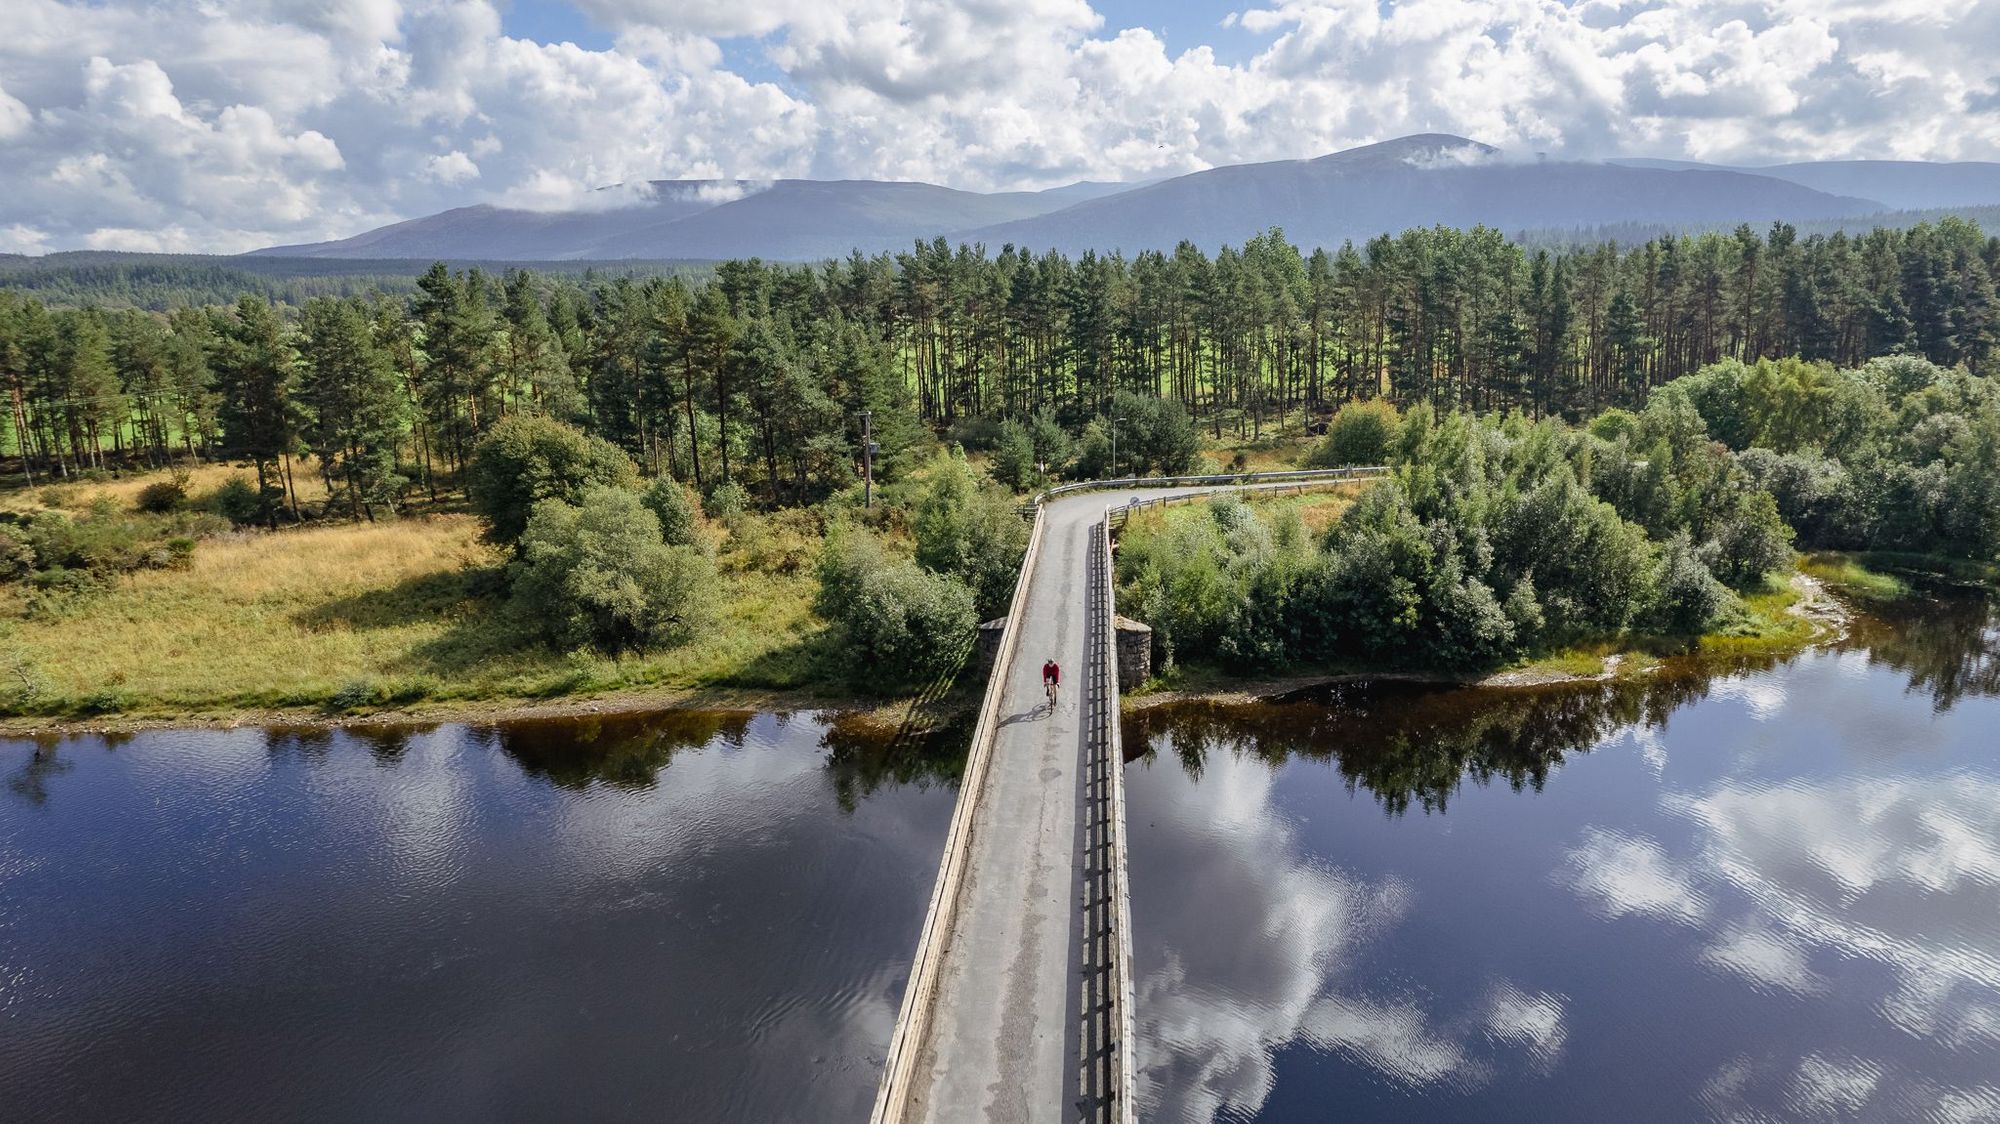 Stitz rides over a bridge in the national park, with the shadow of the mountains behind. Photo: Markus Stitz